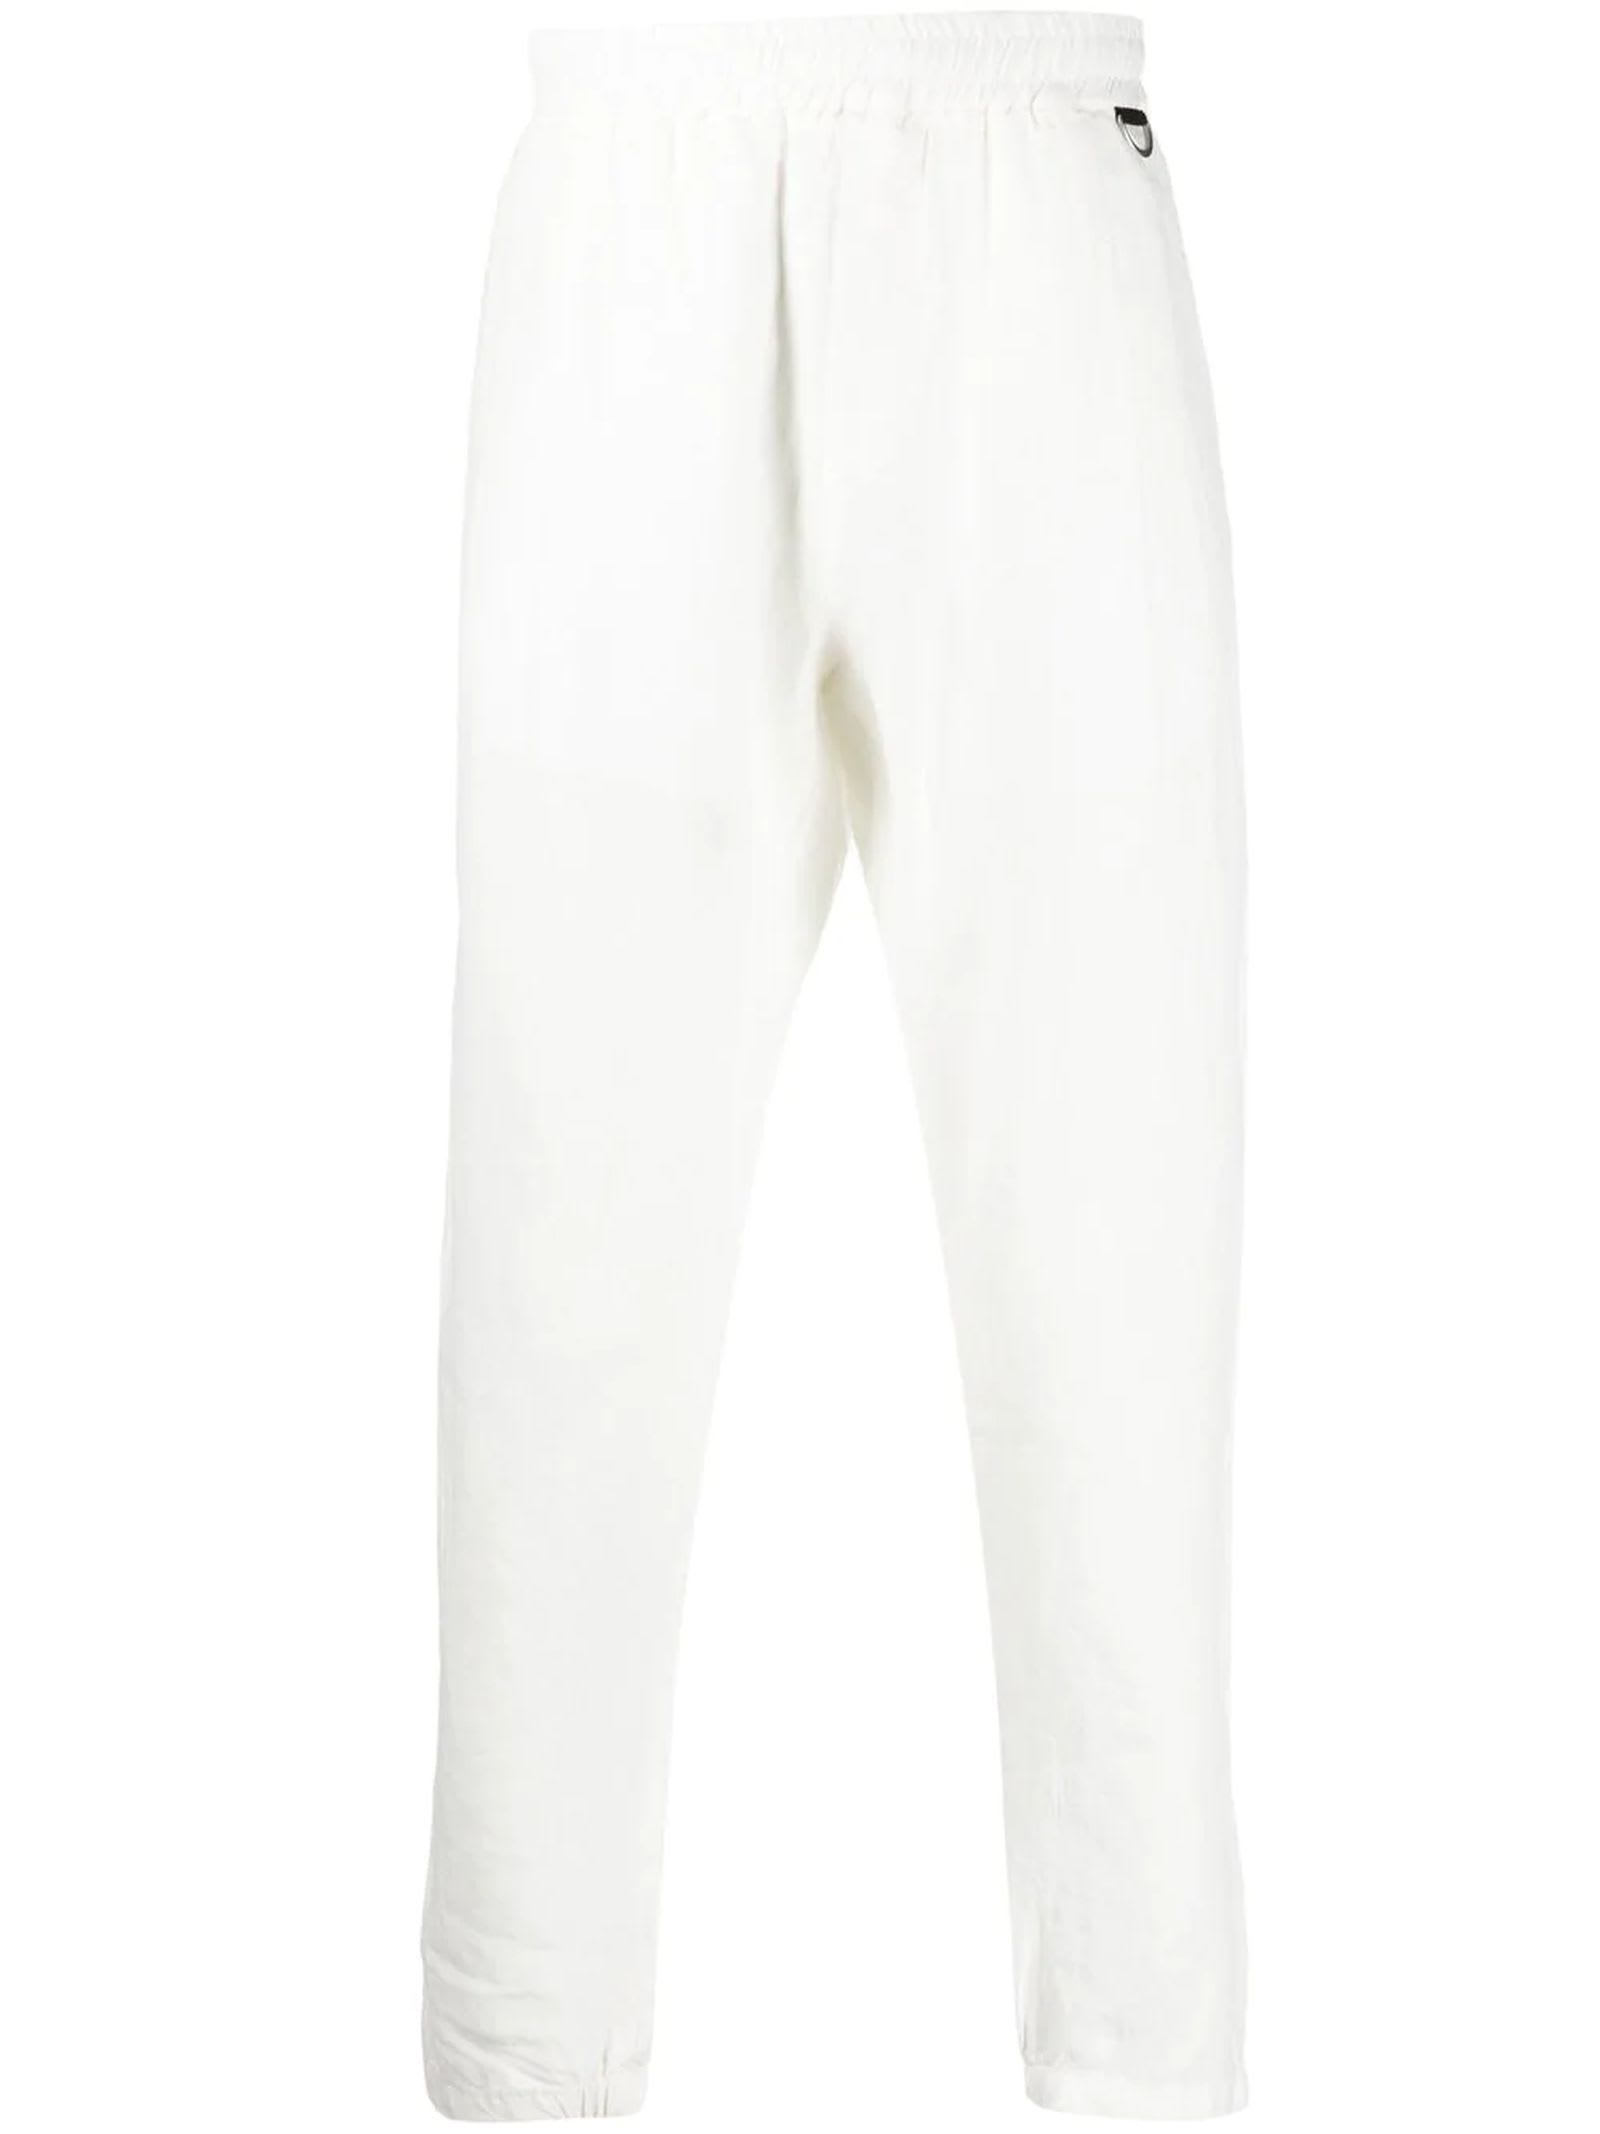 Low Brand White Linen Trousers